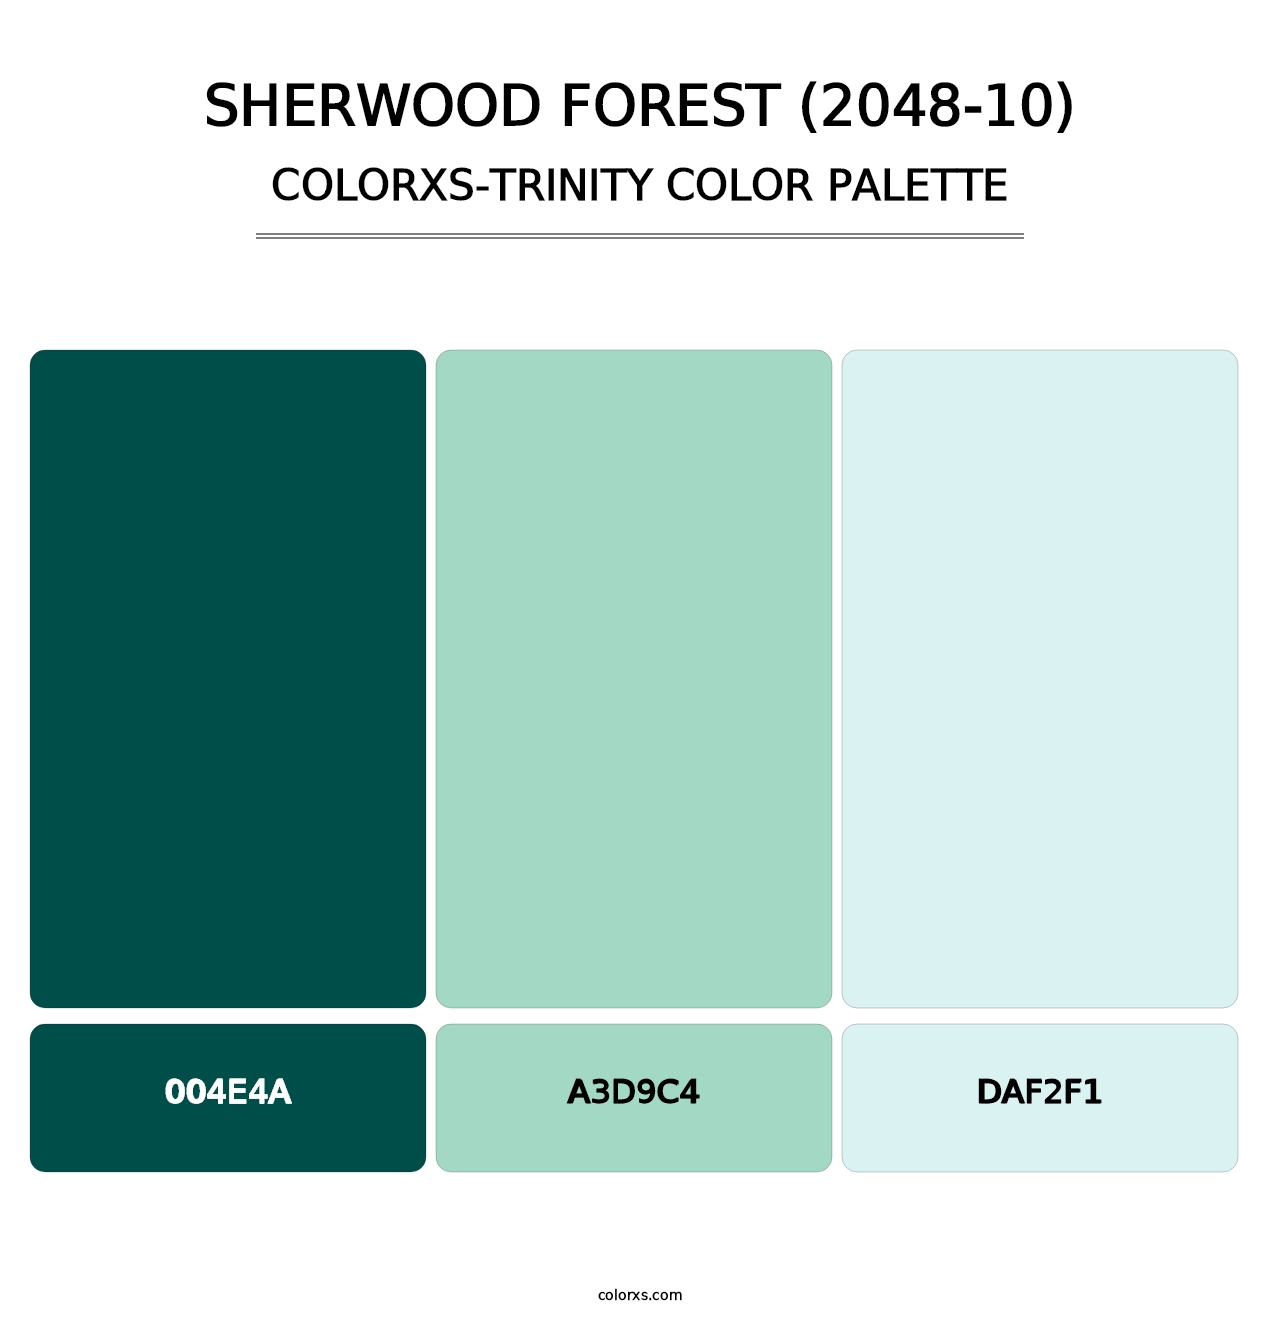 Sherwood Forest (2048-10) - Colorxs Trinity Palette